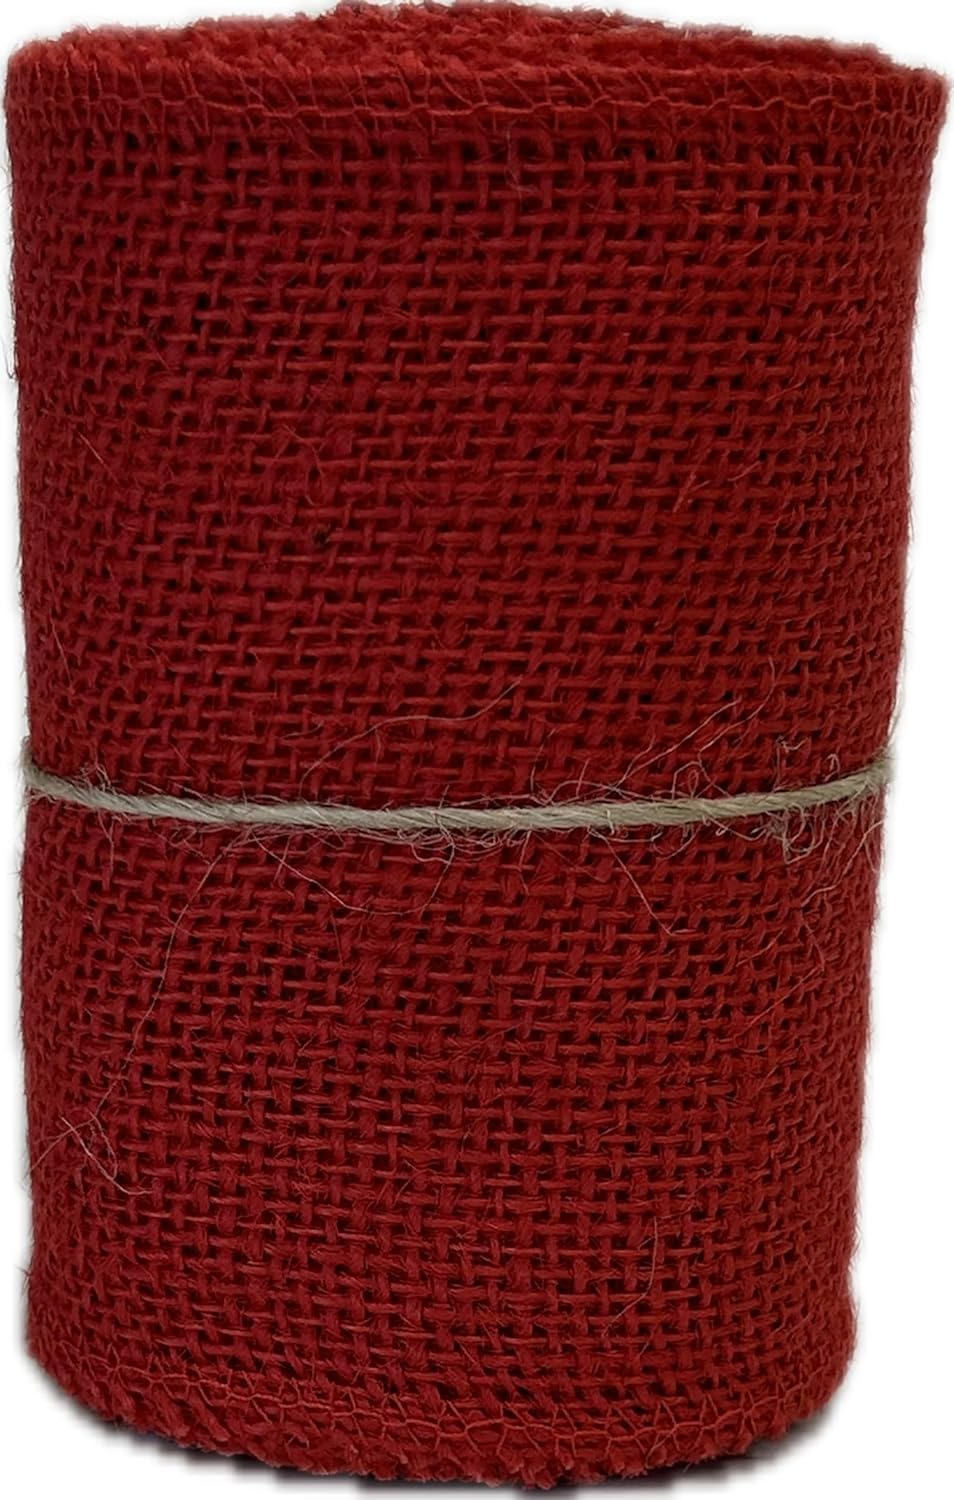 AAYU Brand Premium red 5" Burlap Ribbon Rolls | Red 5 Inch x 5 Yards 100% Natural, Eco-Friendly, Natural Floral Arrangements and Gift Decor (Red)